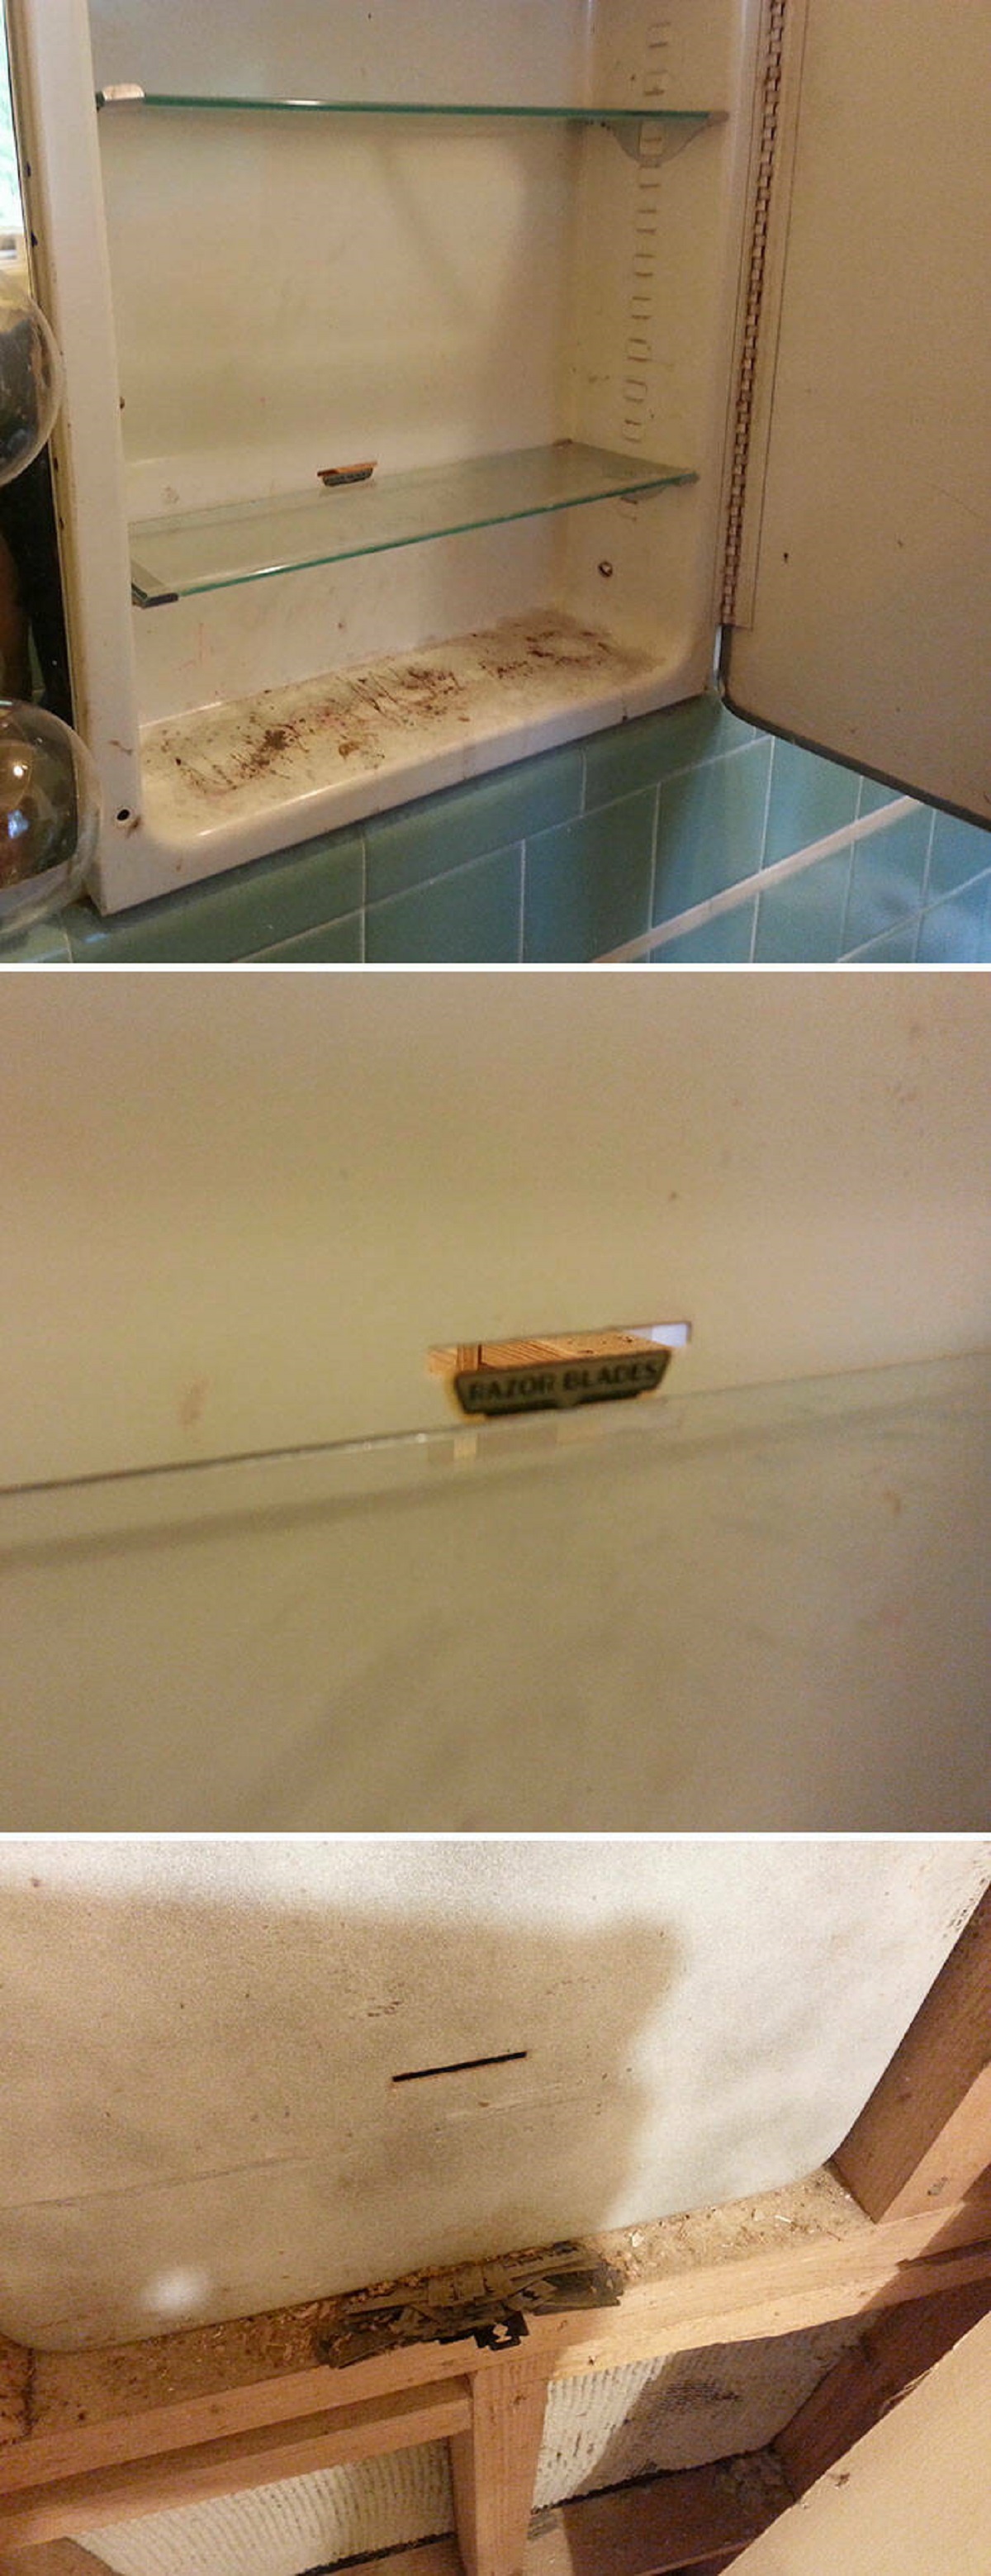 "Apparently, Disposing Of Old Razor Blades Inside Your Wall Was Acceptable In The 1950's"